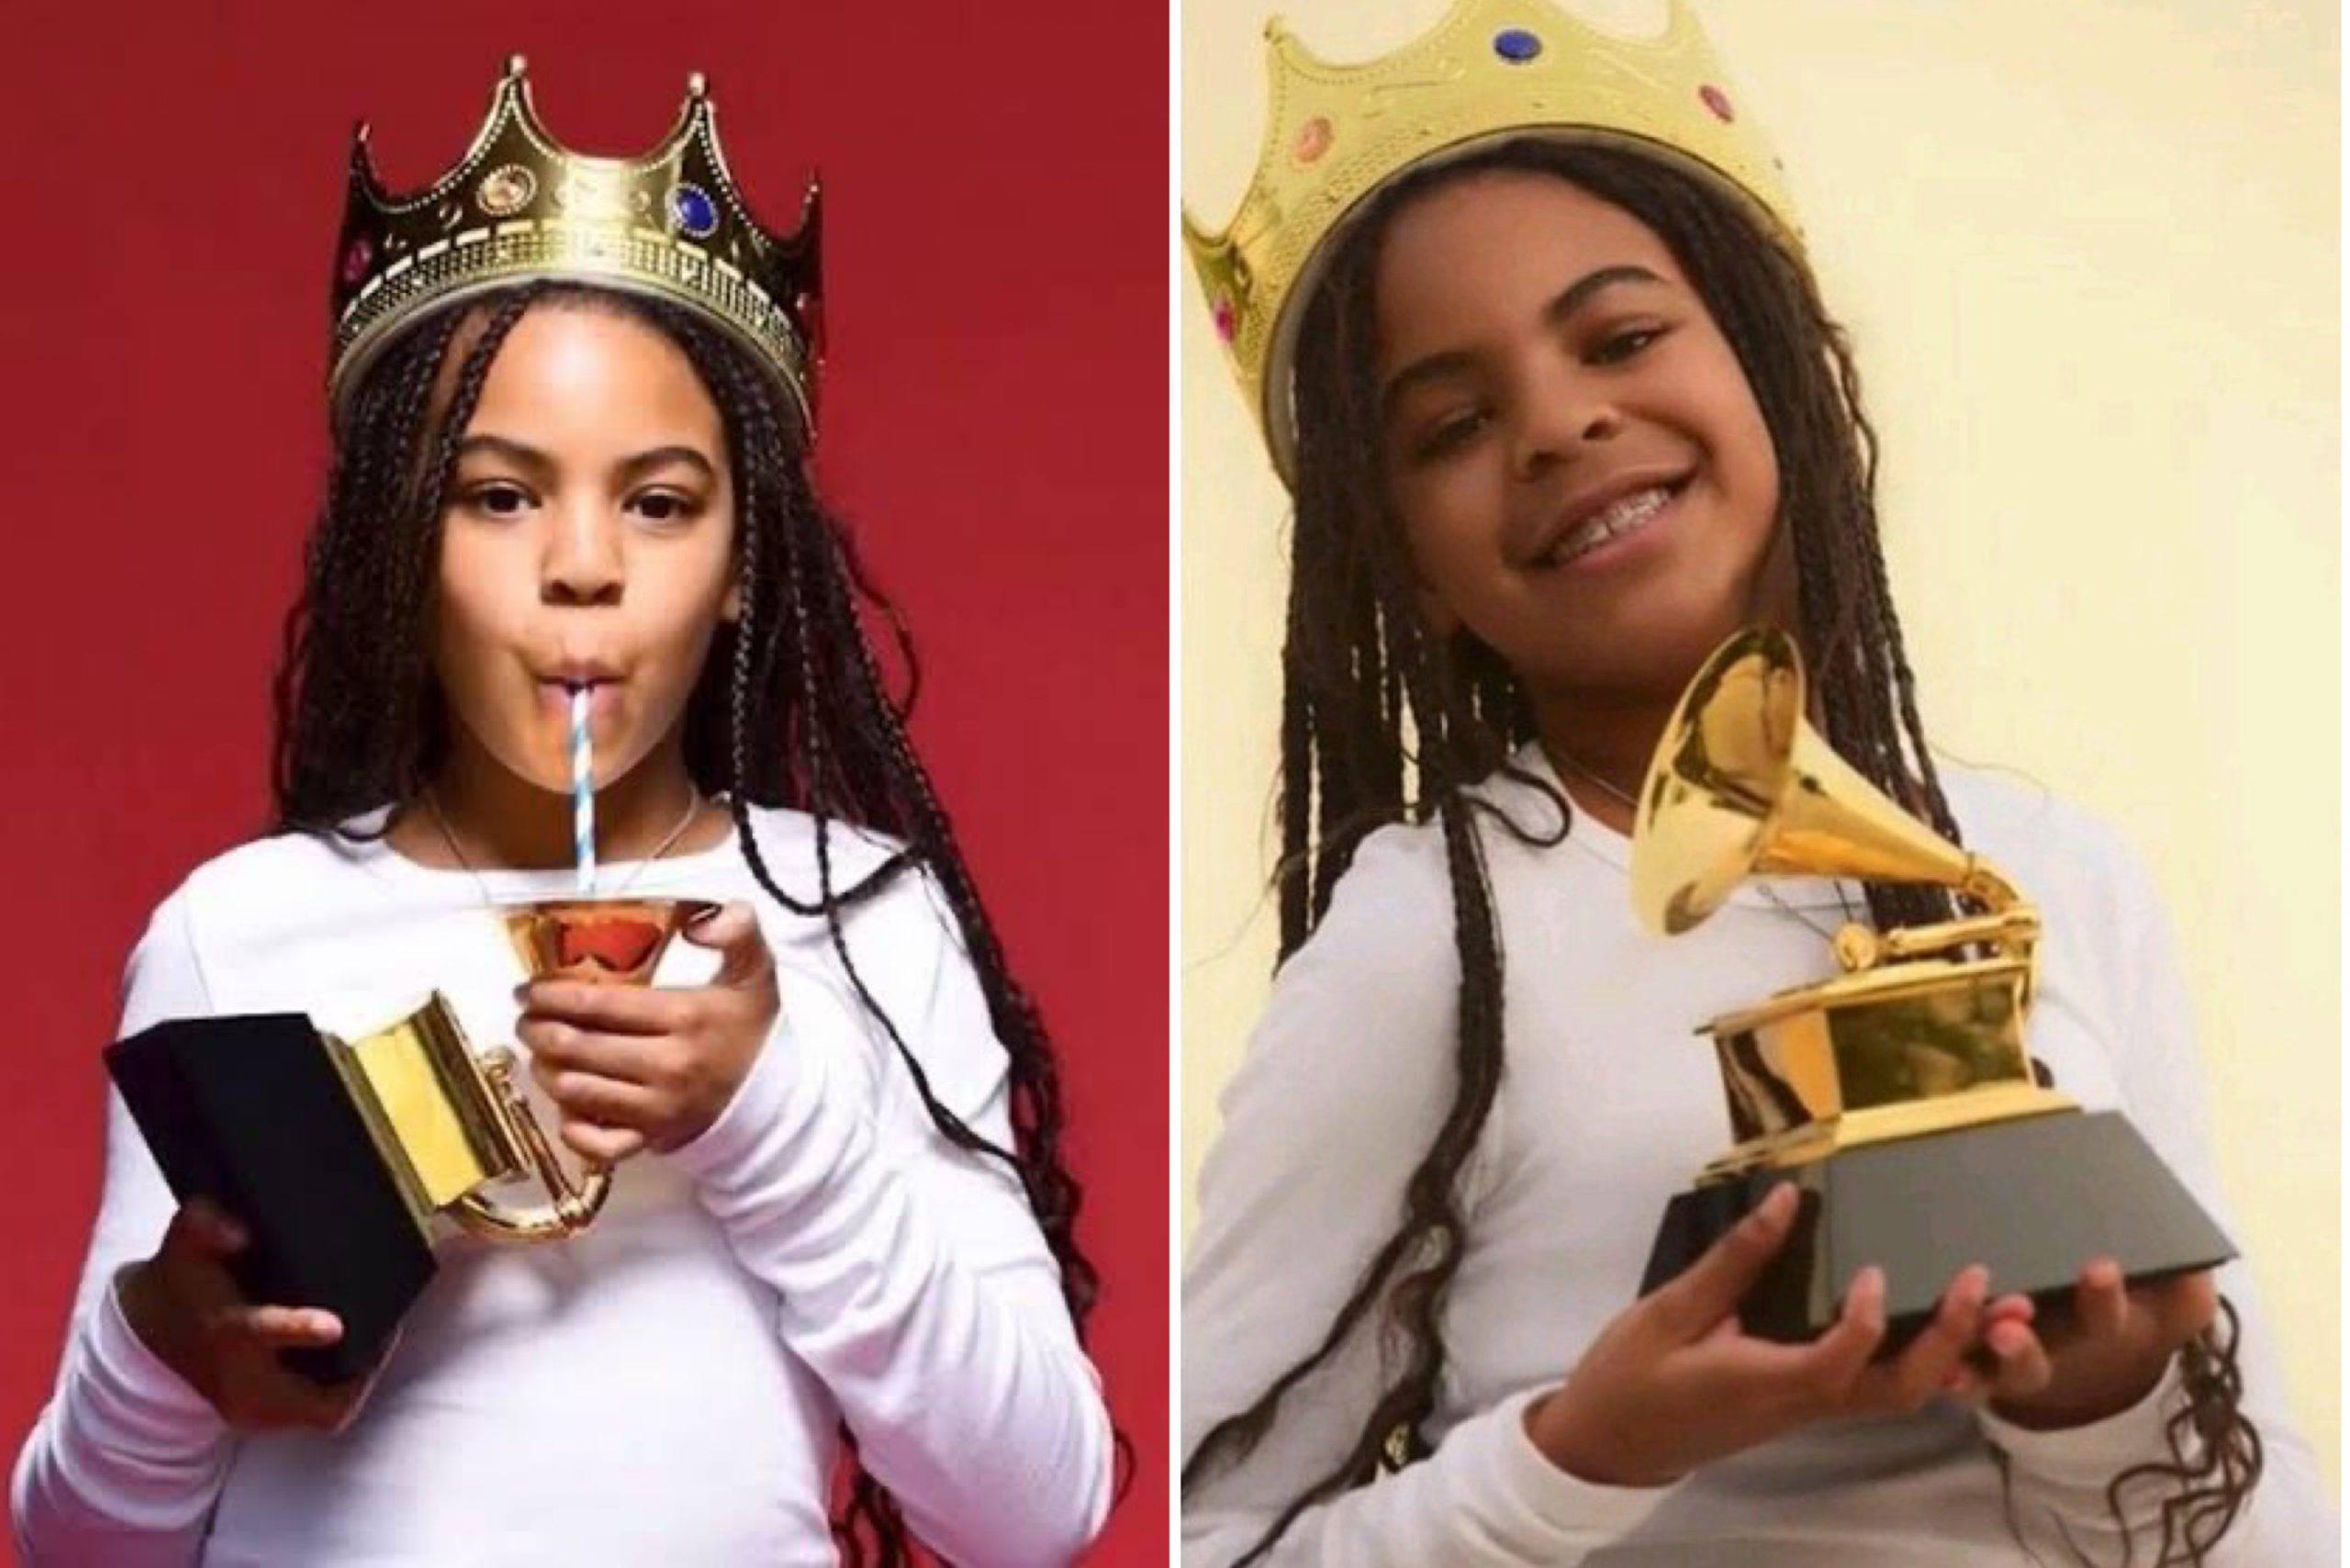 Beyoncé’s Daughter, Blue Ivy, Pictured Drinking Out Of Her First Grammy Award